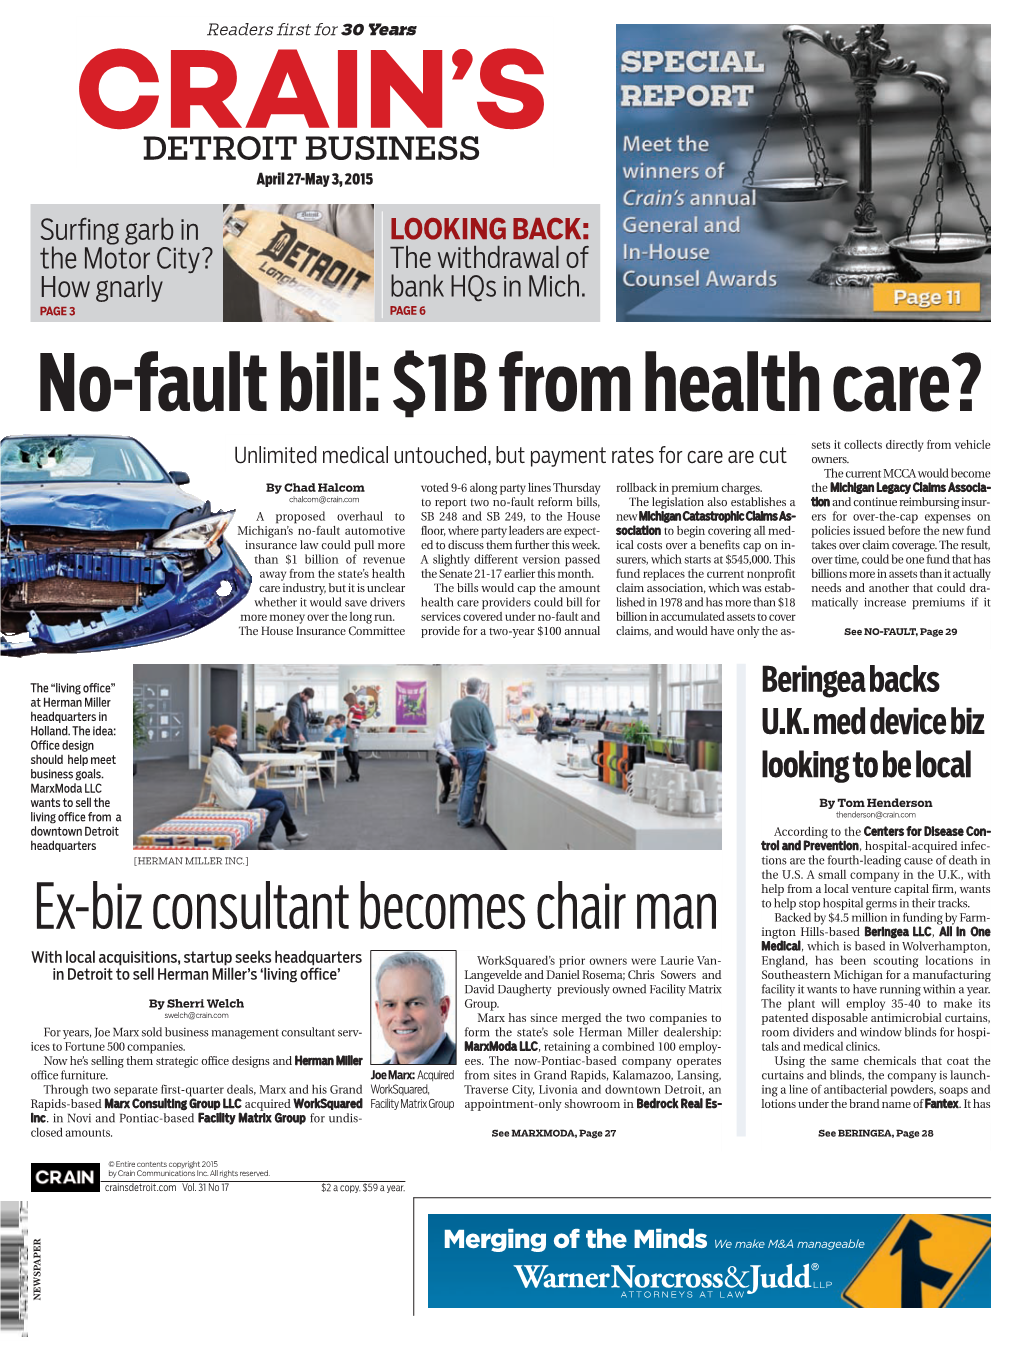 No-Fault Bill: $1B from Health Care?